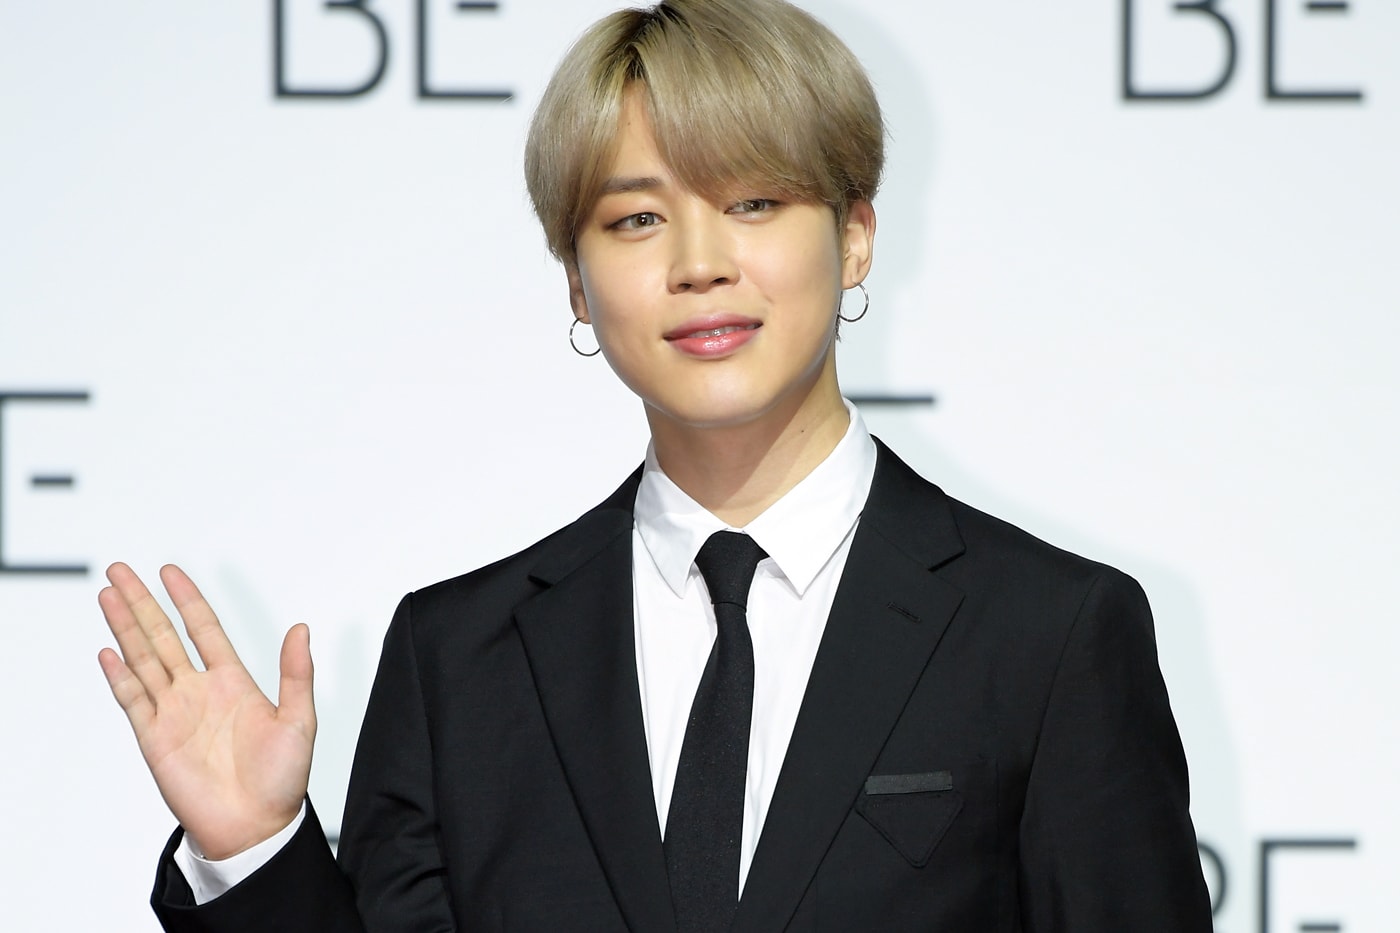 BTS's Jimin Sells Out A Louis Vuitton Outfit And Weverse Merch